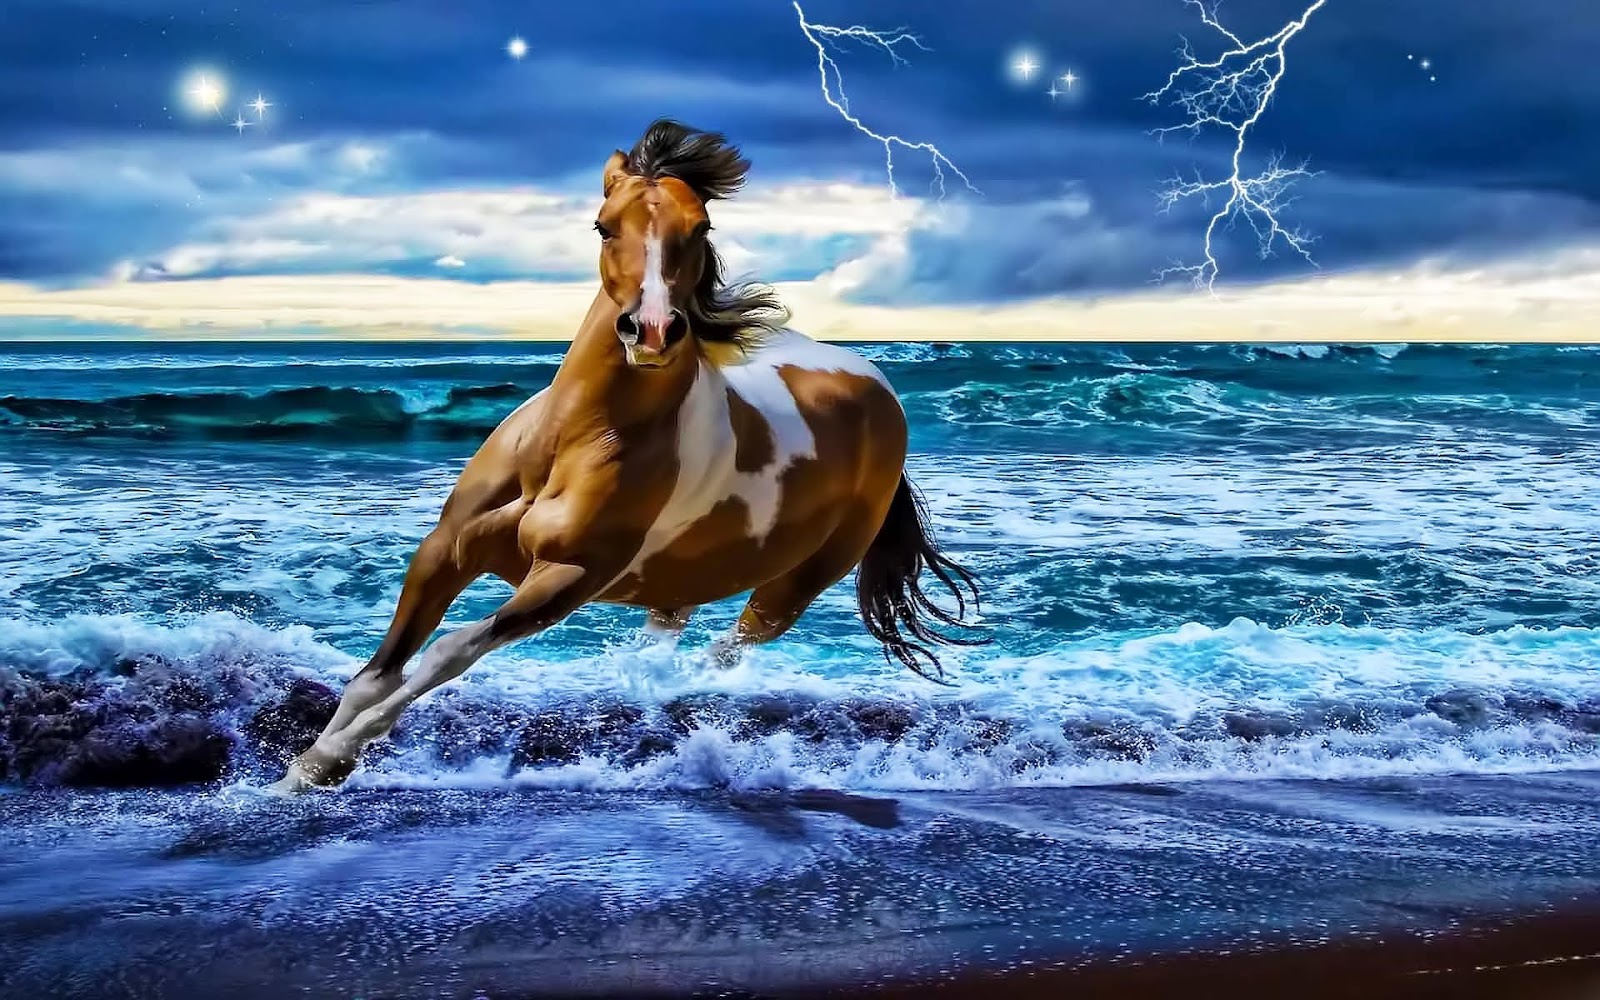 http://4.bp.blogspot.com/-fOozP12he5Y/T3rnmY4YWZI/AAAAAAAABNQ/zI3m_k2NHcw/s1600/a-horse-running-with-thunder-on-see-background.jpg